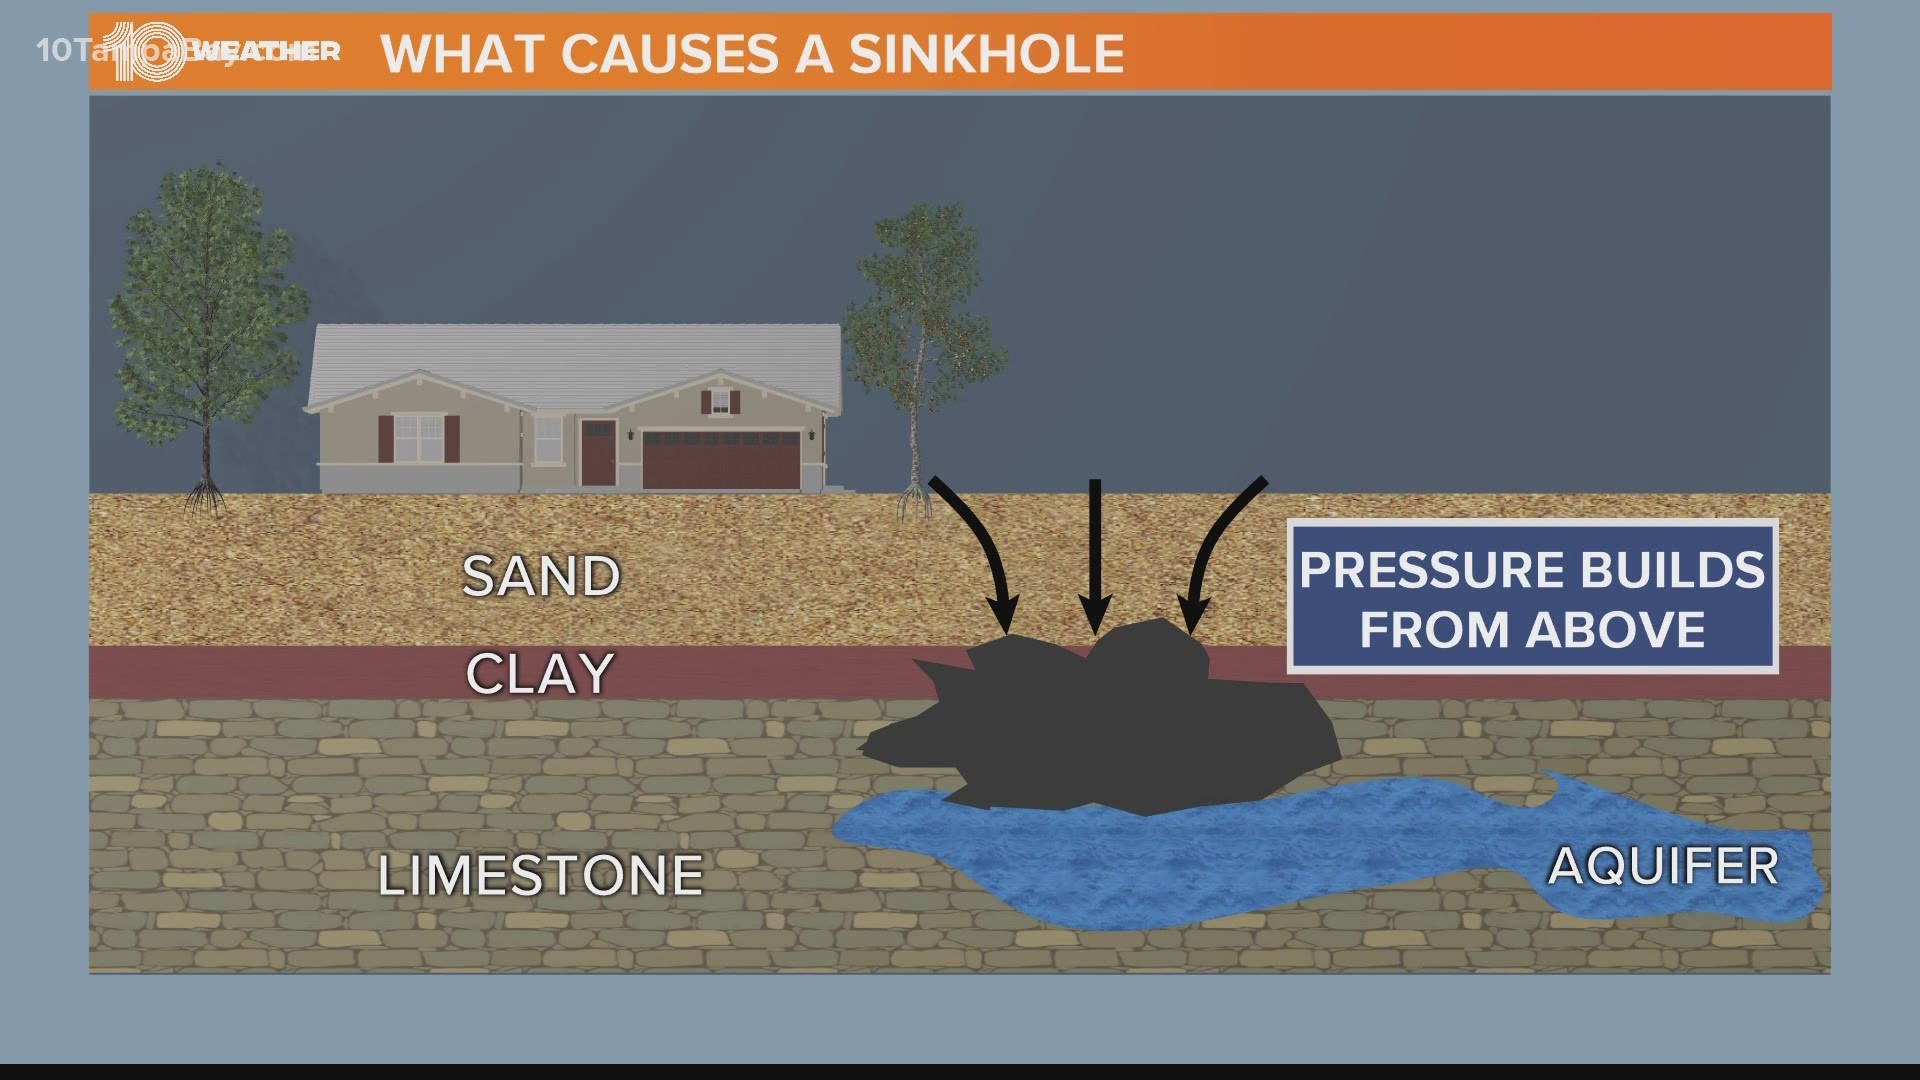 Florida is one of the leading states to see sinkhole activity.